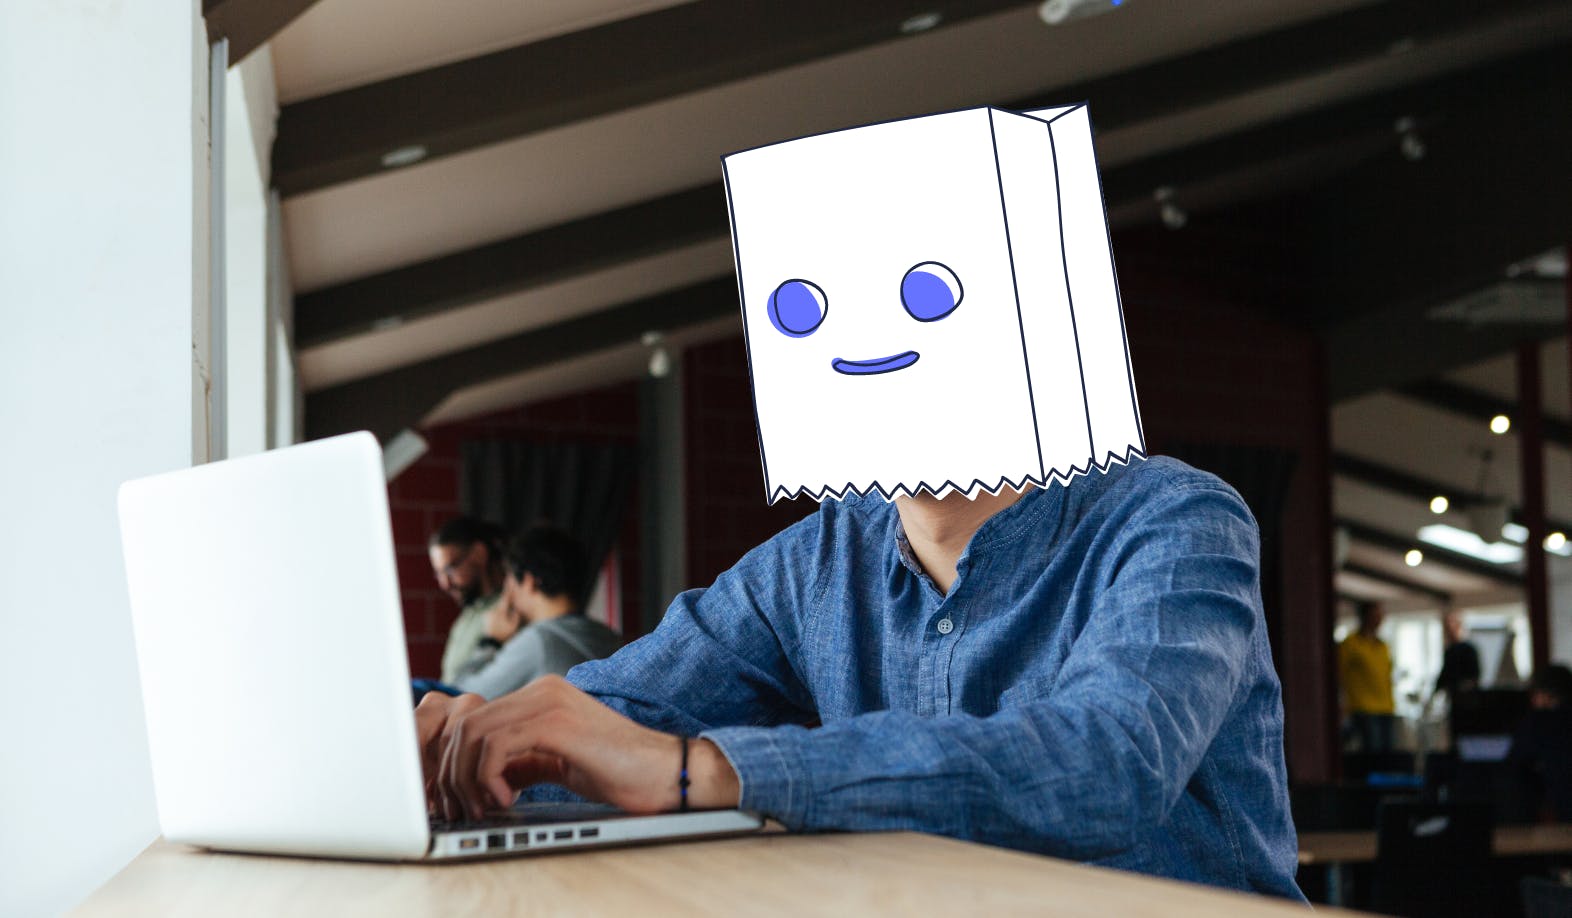 Photographic image of a man behind his laptop. In the StartMail illustration style a paper bag with an illustrated face representing Bagman, representing being anonymous.